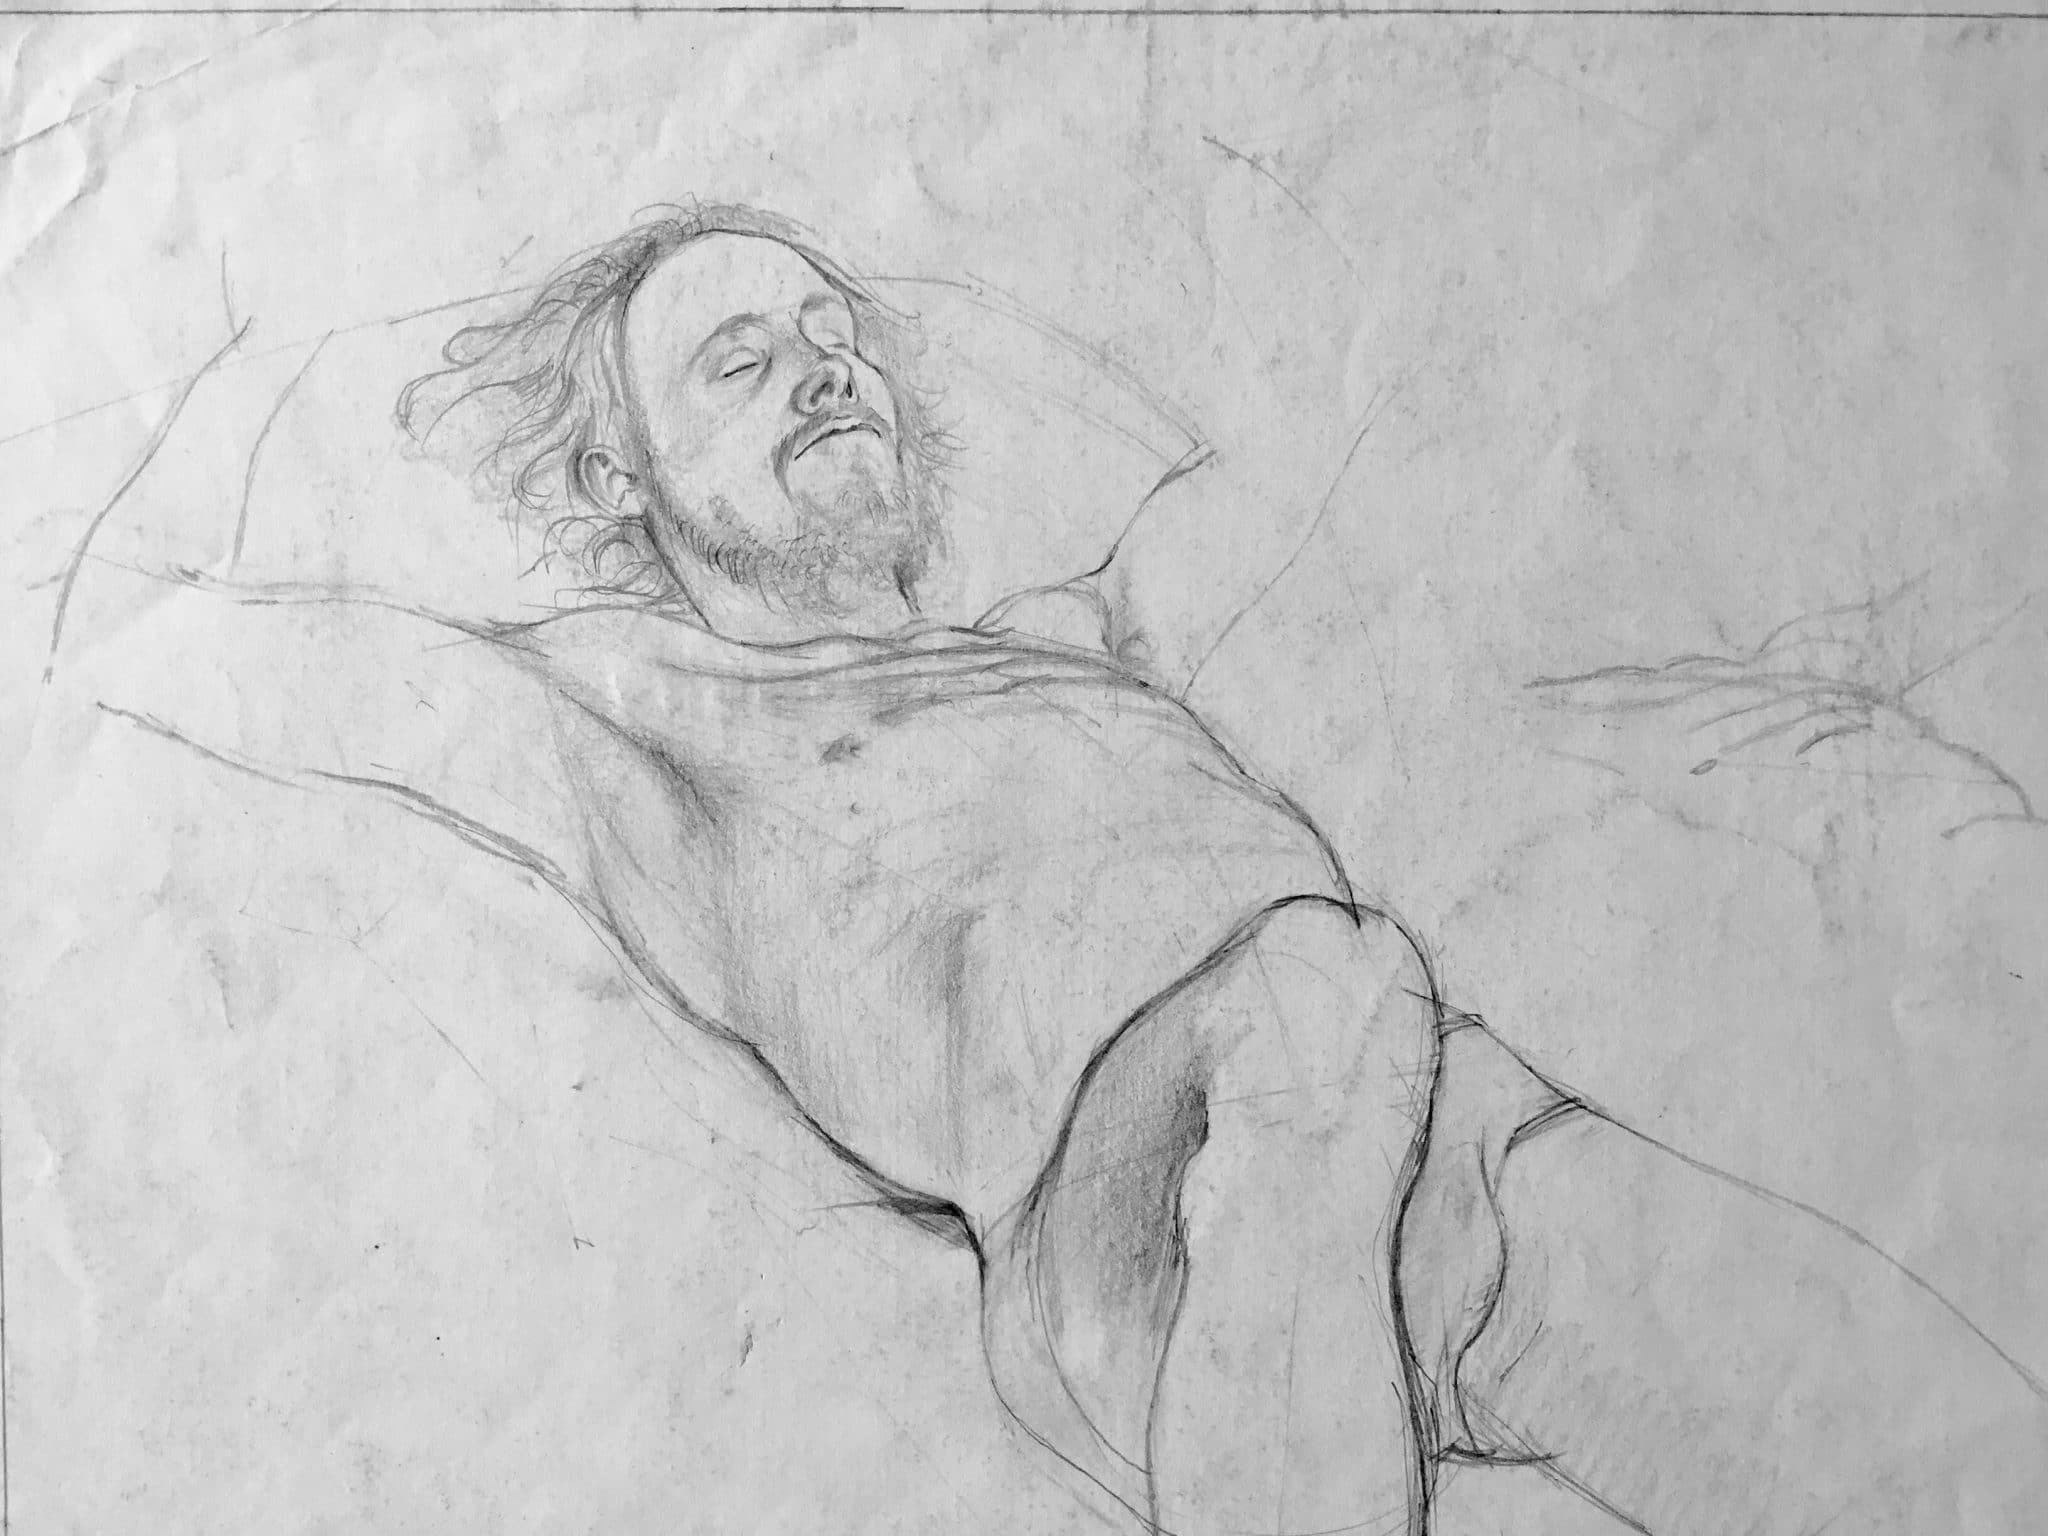 Male model available for life drawing or photo shoots  Artists  Musicians   City of Toronto  Kijiji